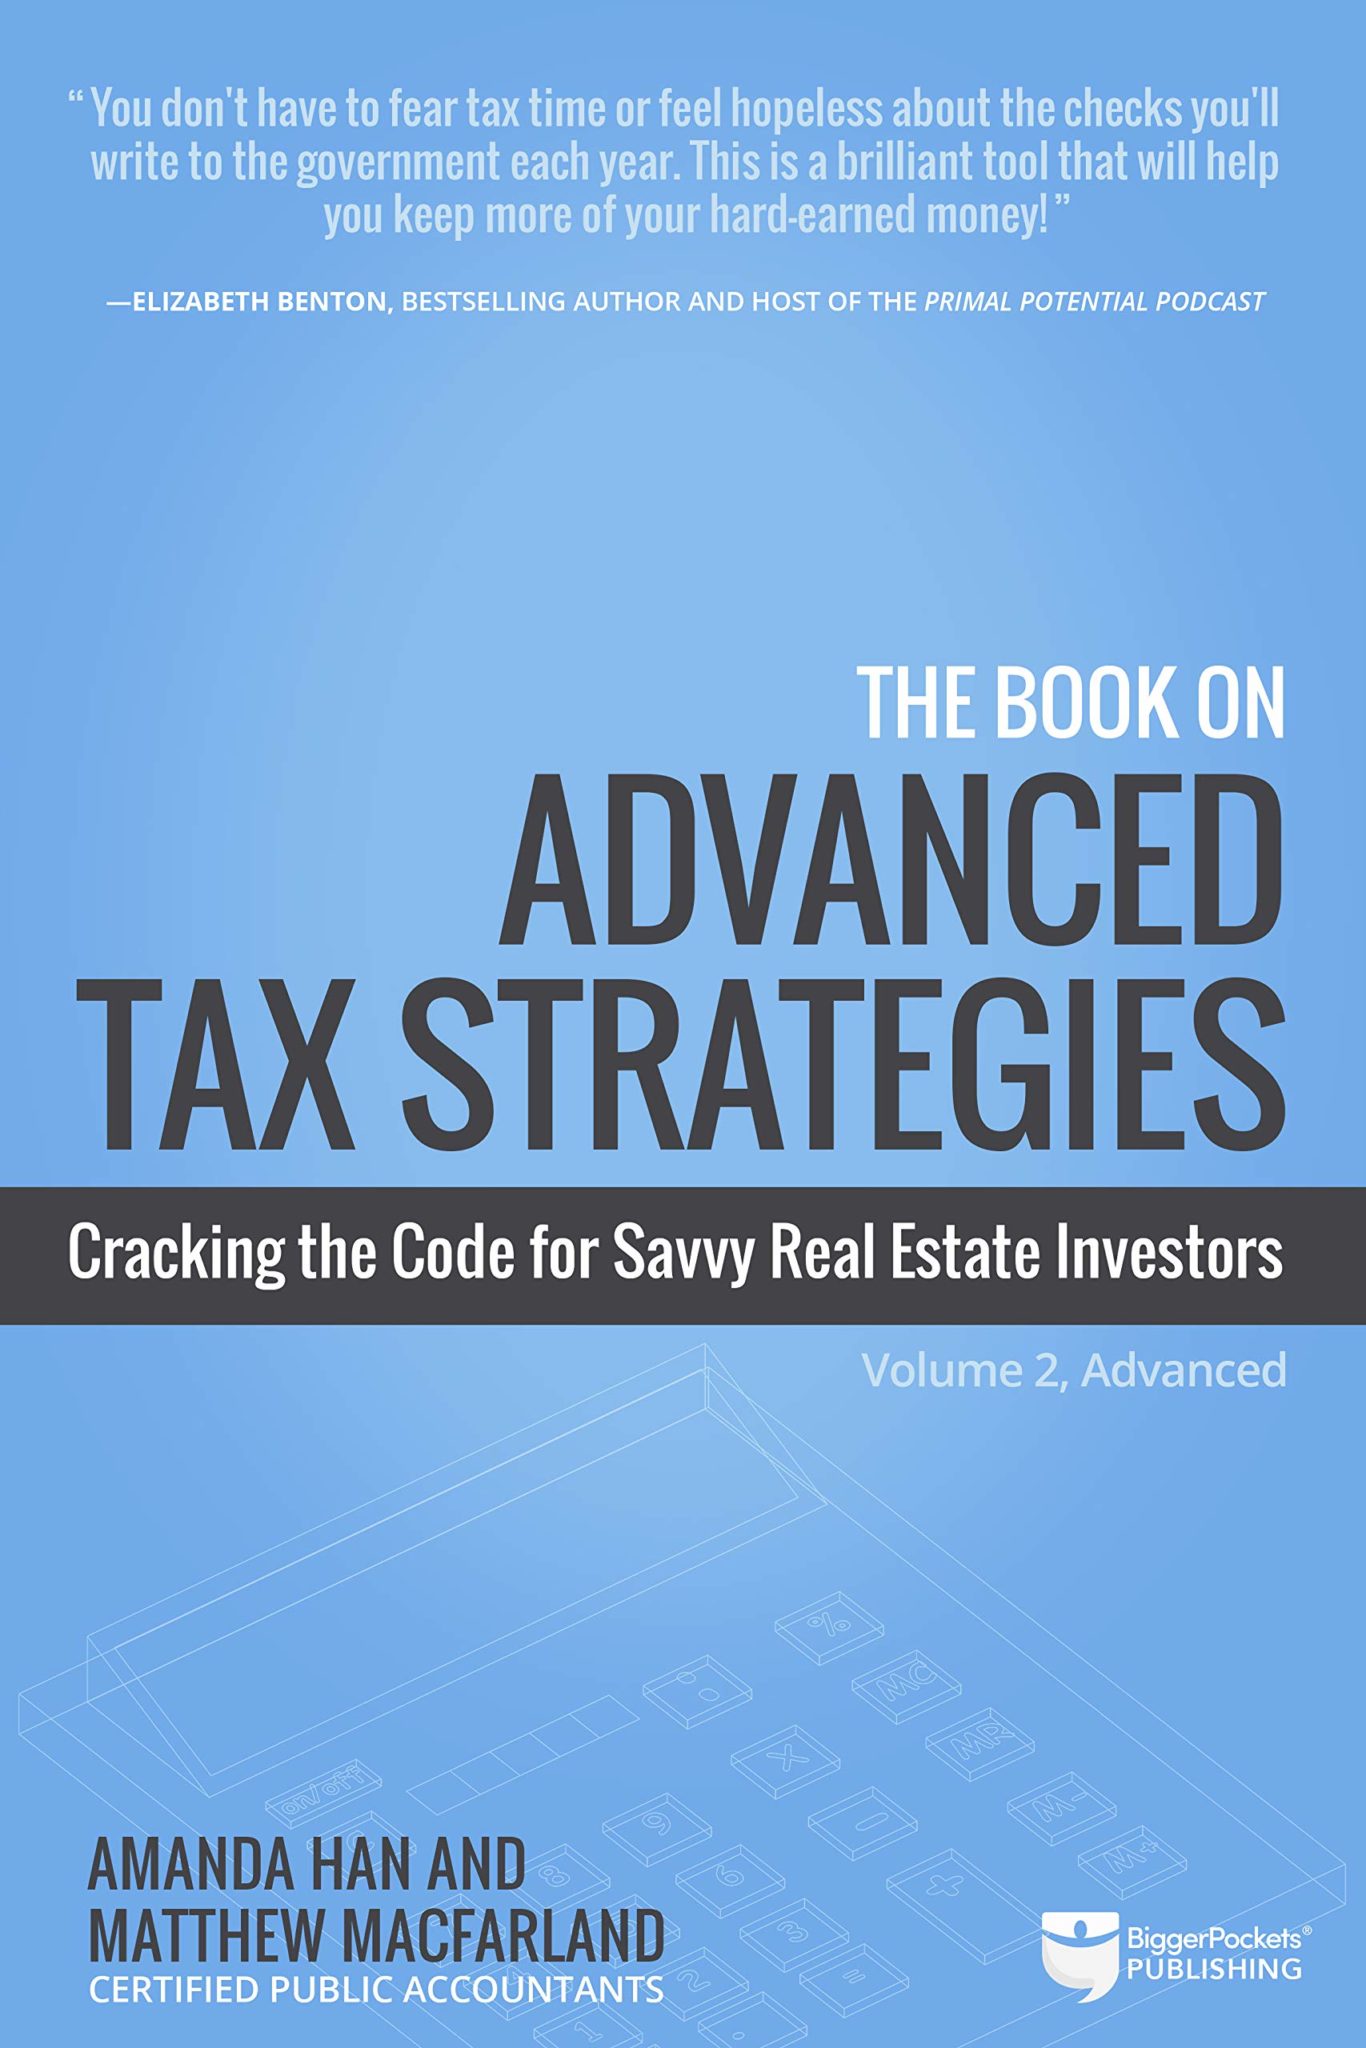 Best Real Estate Book on Cracking the Code for Savvy Real Estate Investors